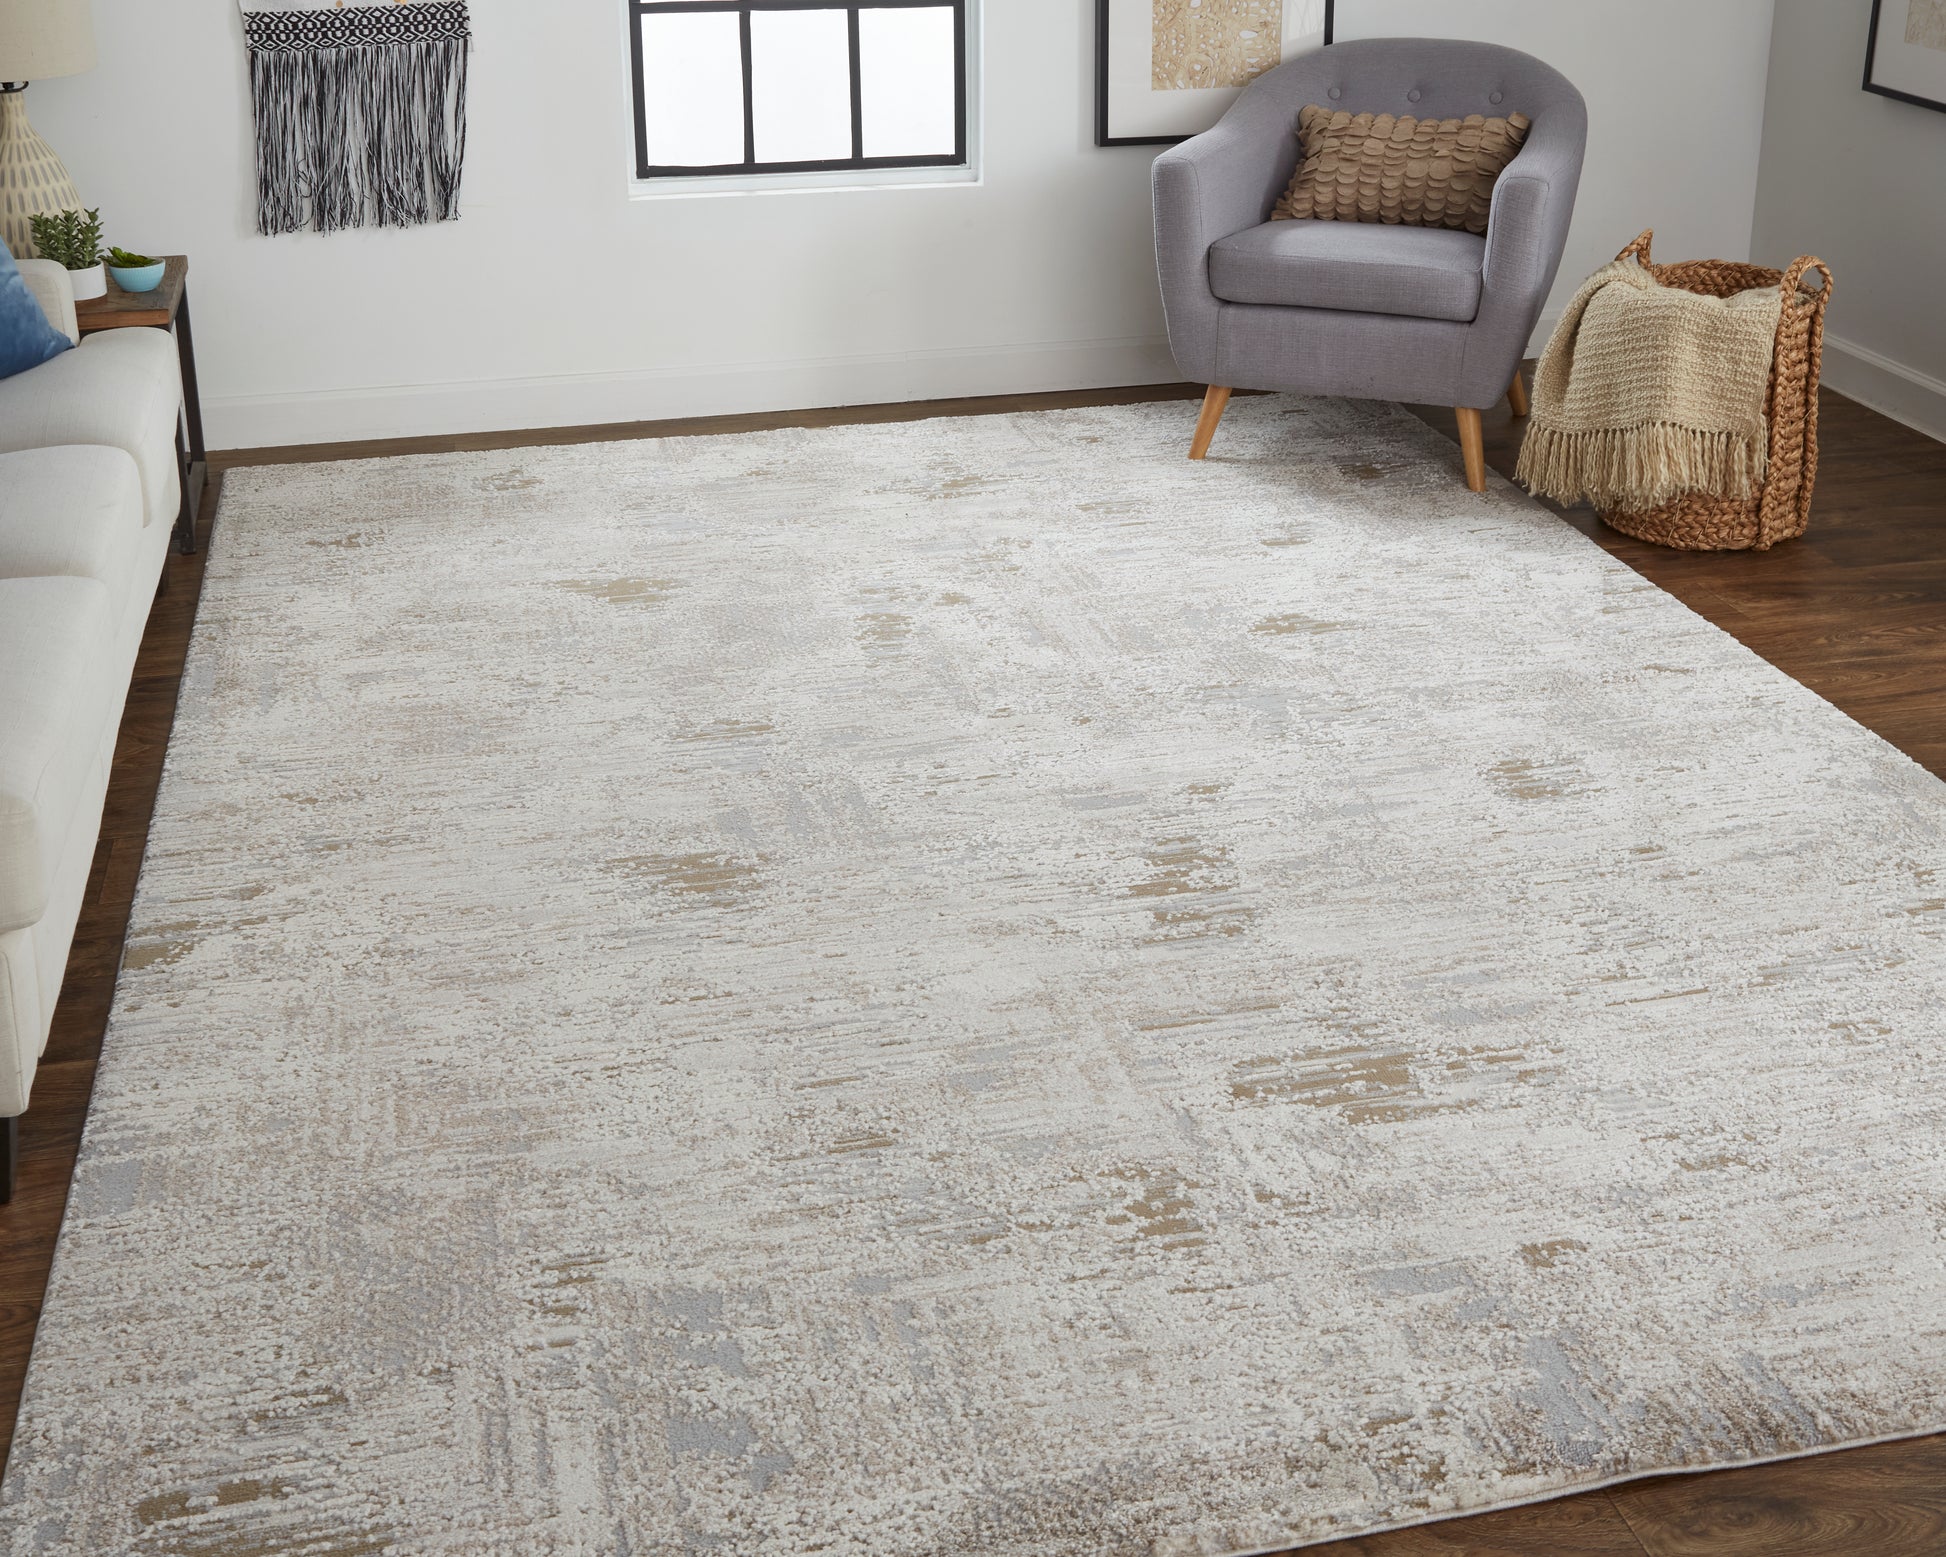 Feizy Vancouver 39Fhf Ivory/Gray Area Rug